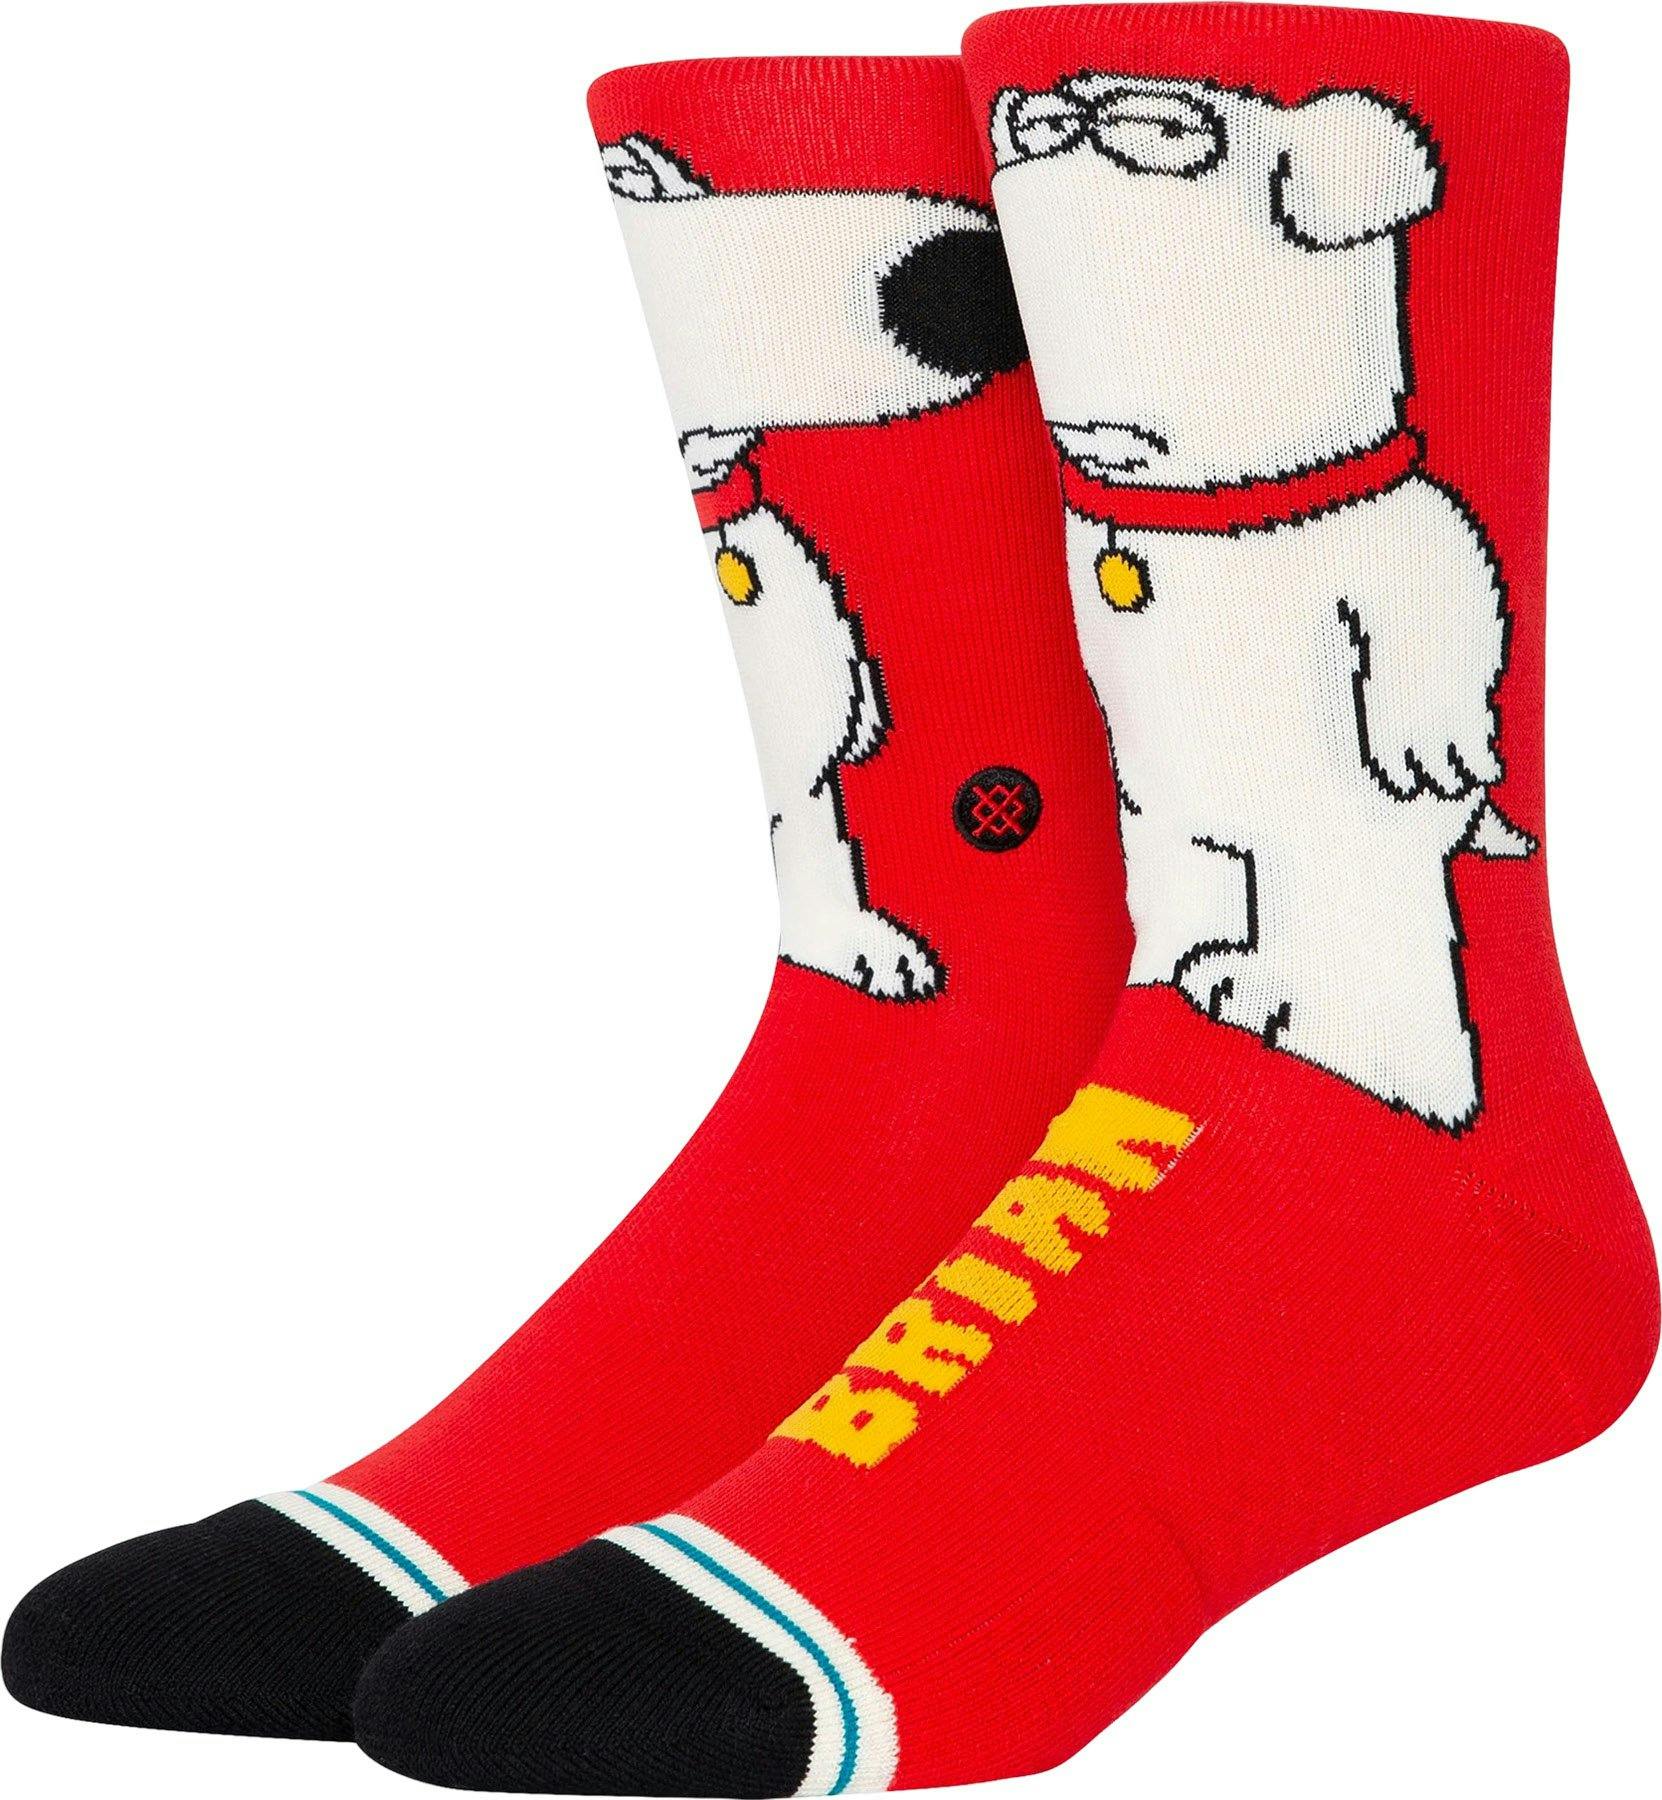 Product image for Family Guy X Stance The Dog Crew Socks - Unisex